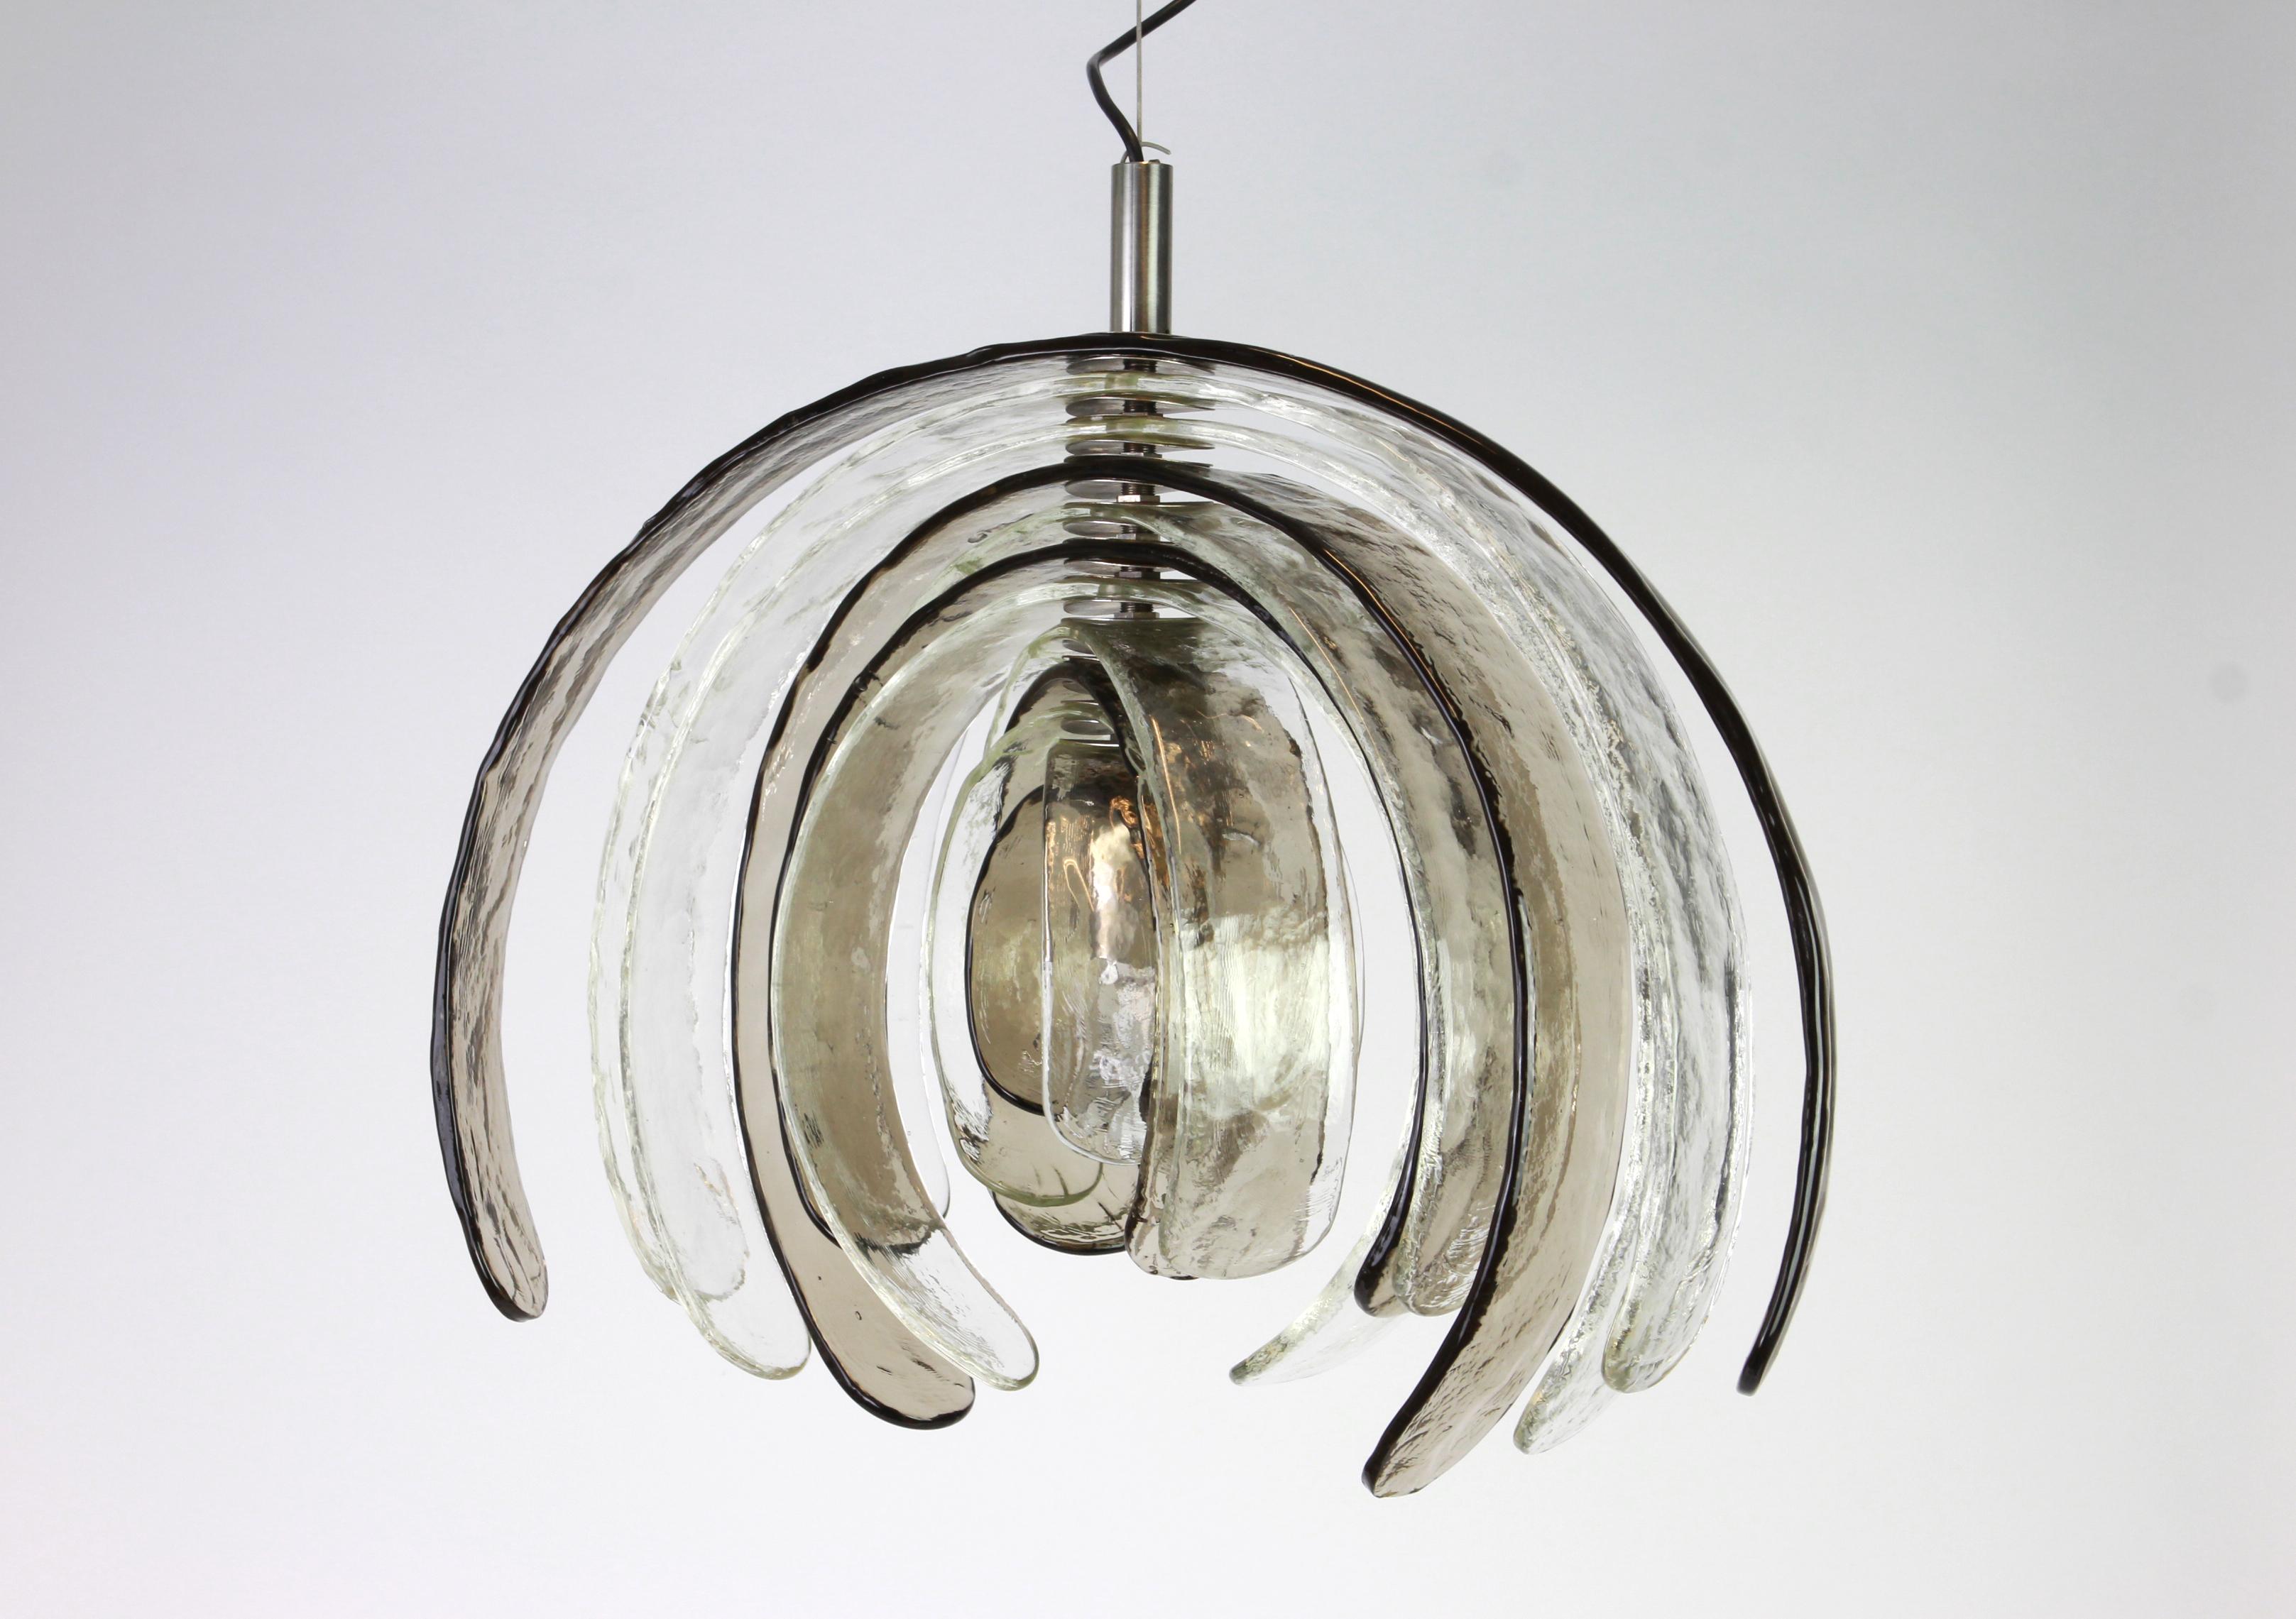 A stunning huge Murano glass chandelier designed by Carlo Nason for Kalmar, Austria, manufactured in the 1960s.
The chandelier is composed of 12 thick Murano glass elements attached to a chrome metal frame.

High quality and in very good